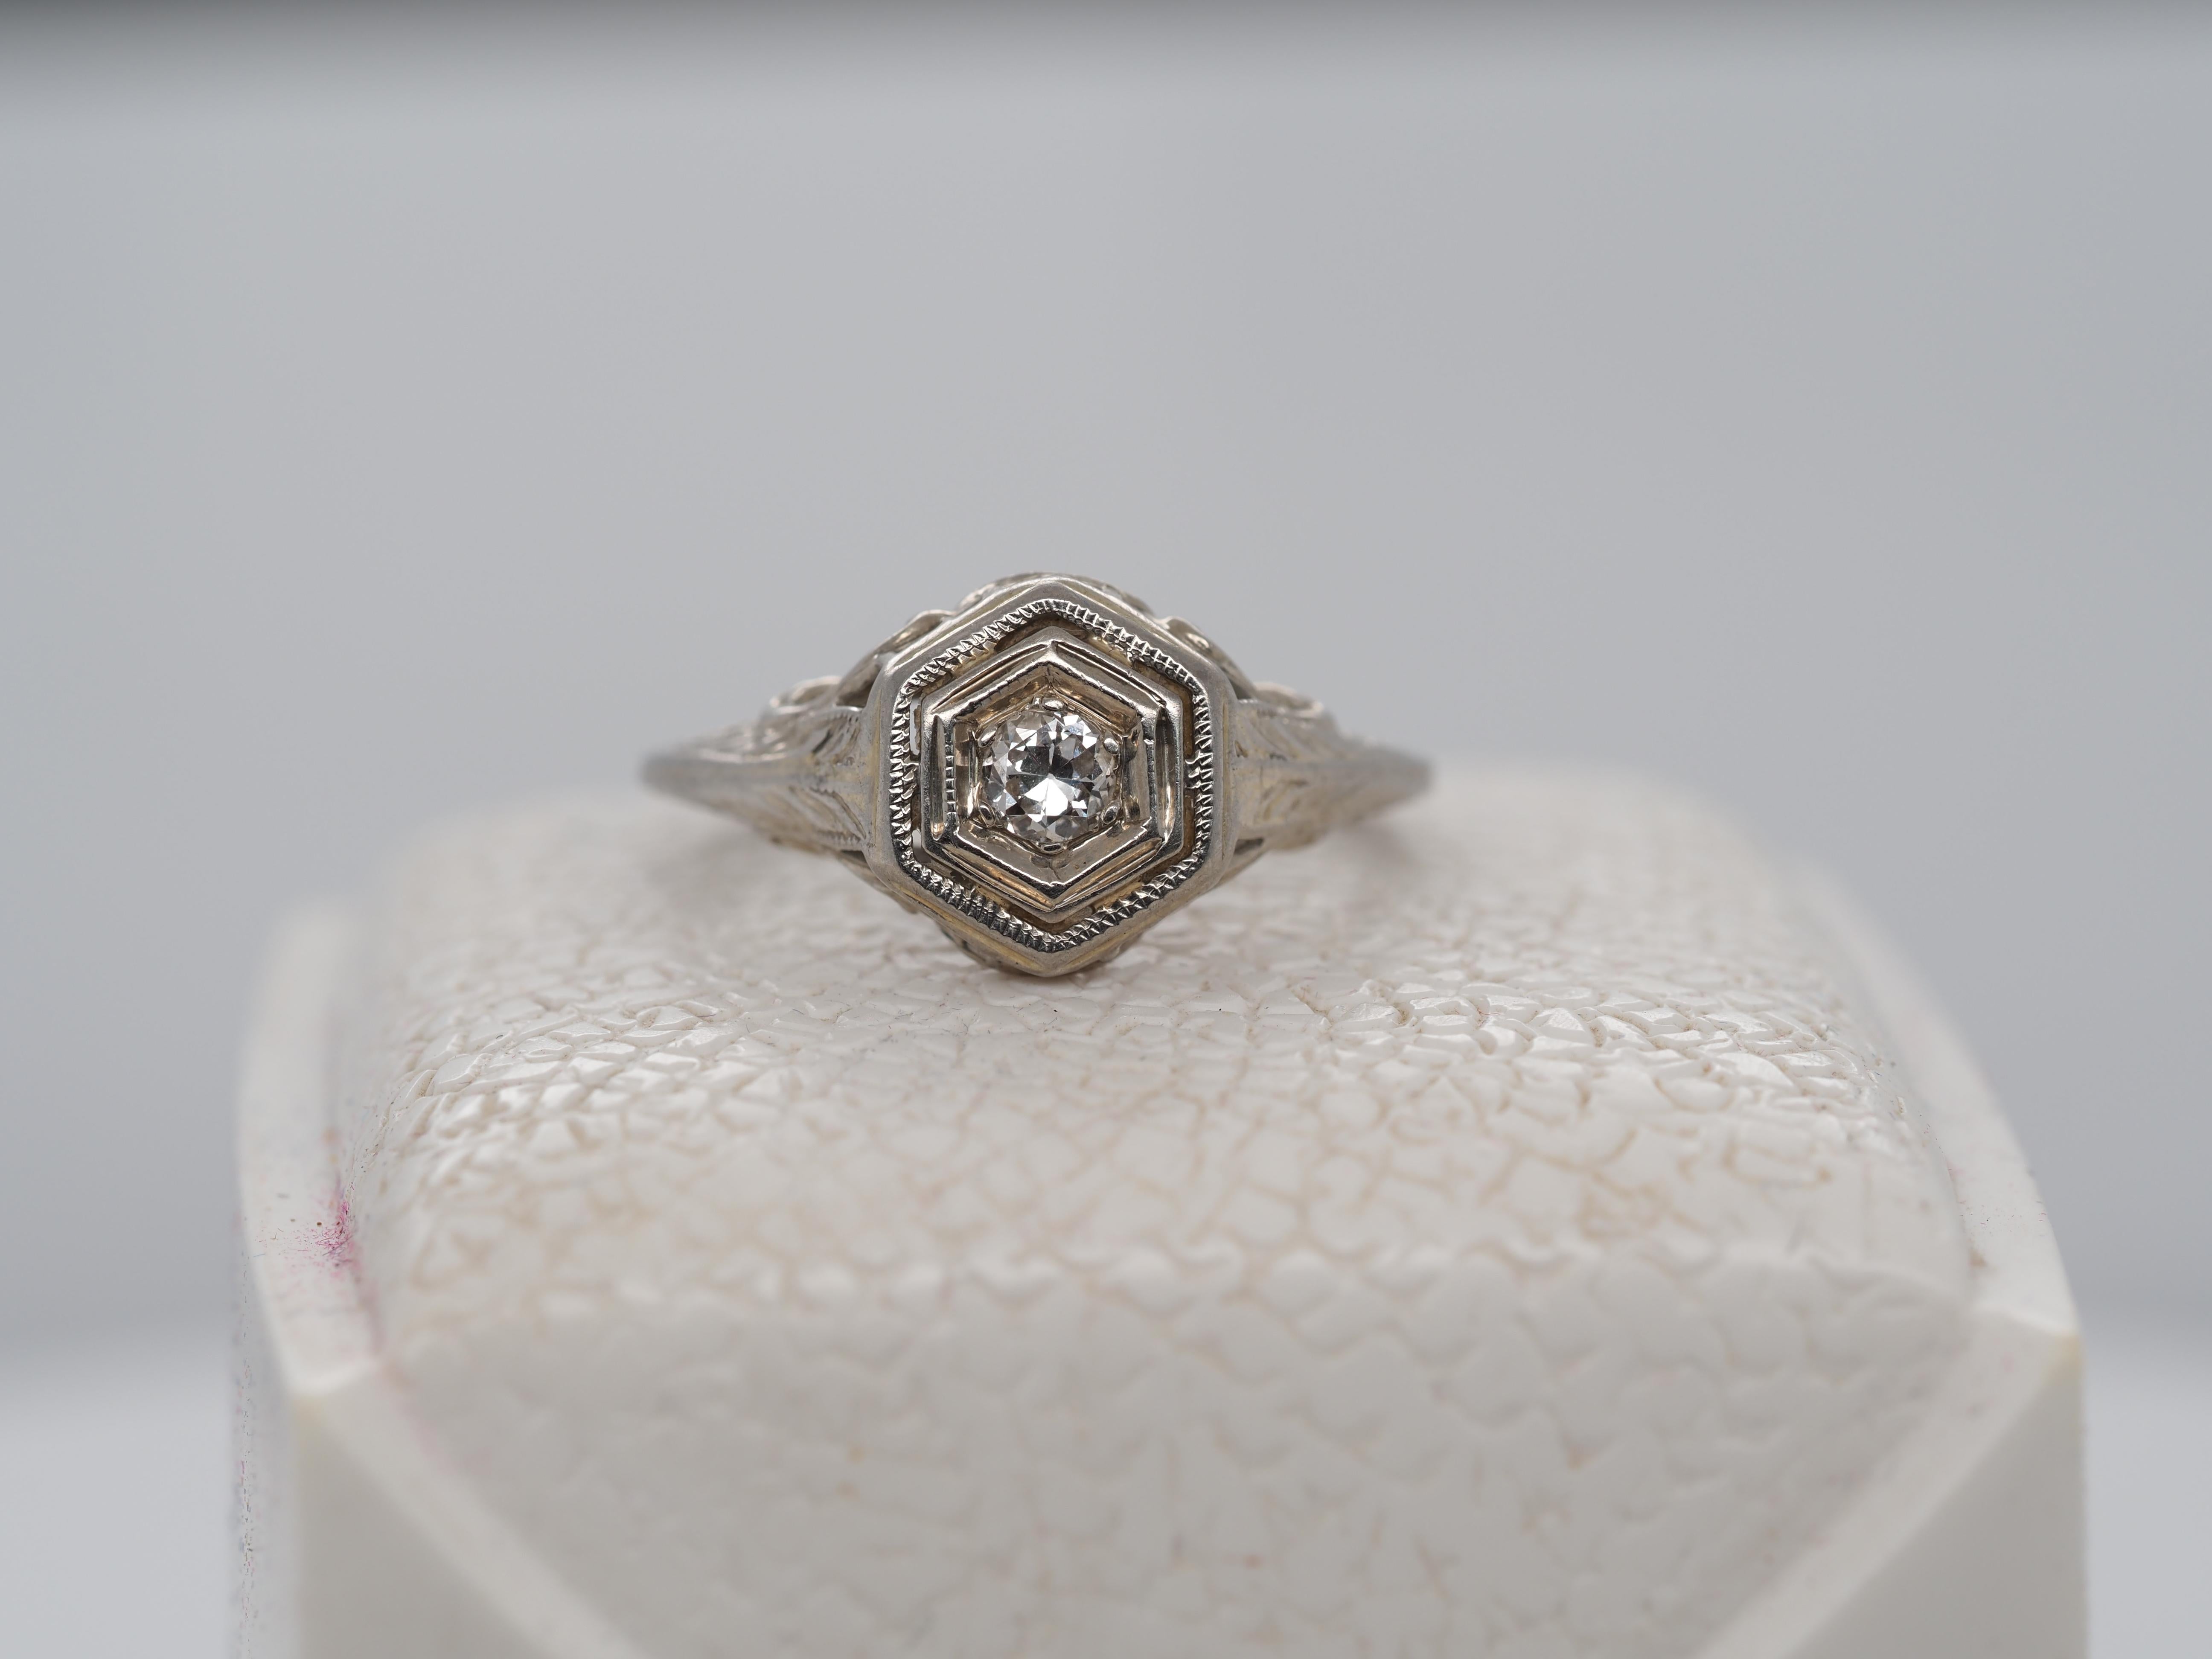 Item Details:
Ring Size: 5
Metal Type: 18k White Gold [Hallmarked, and Tested]
Weight: 2.5 grams
‌
Diamond Details:
Weight: .10ct
Cut: Old European Cut
Clarity: VS
Color: G
‌
Band Width: 1.5 mm
Condition: Excellent